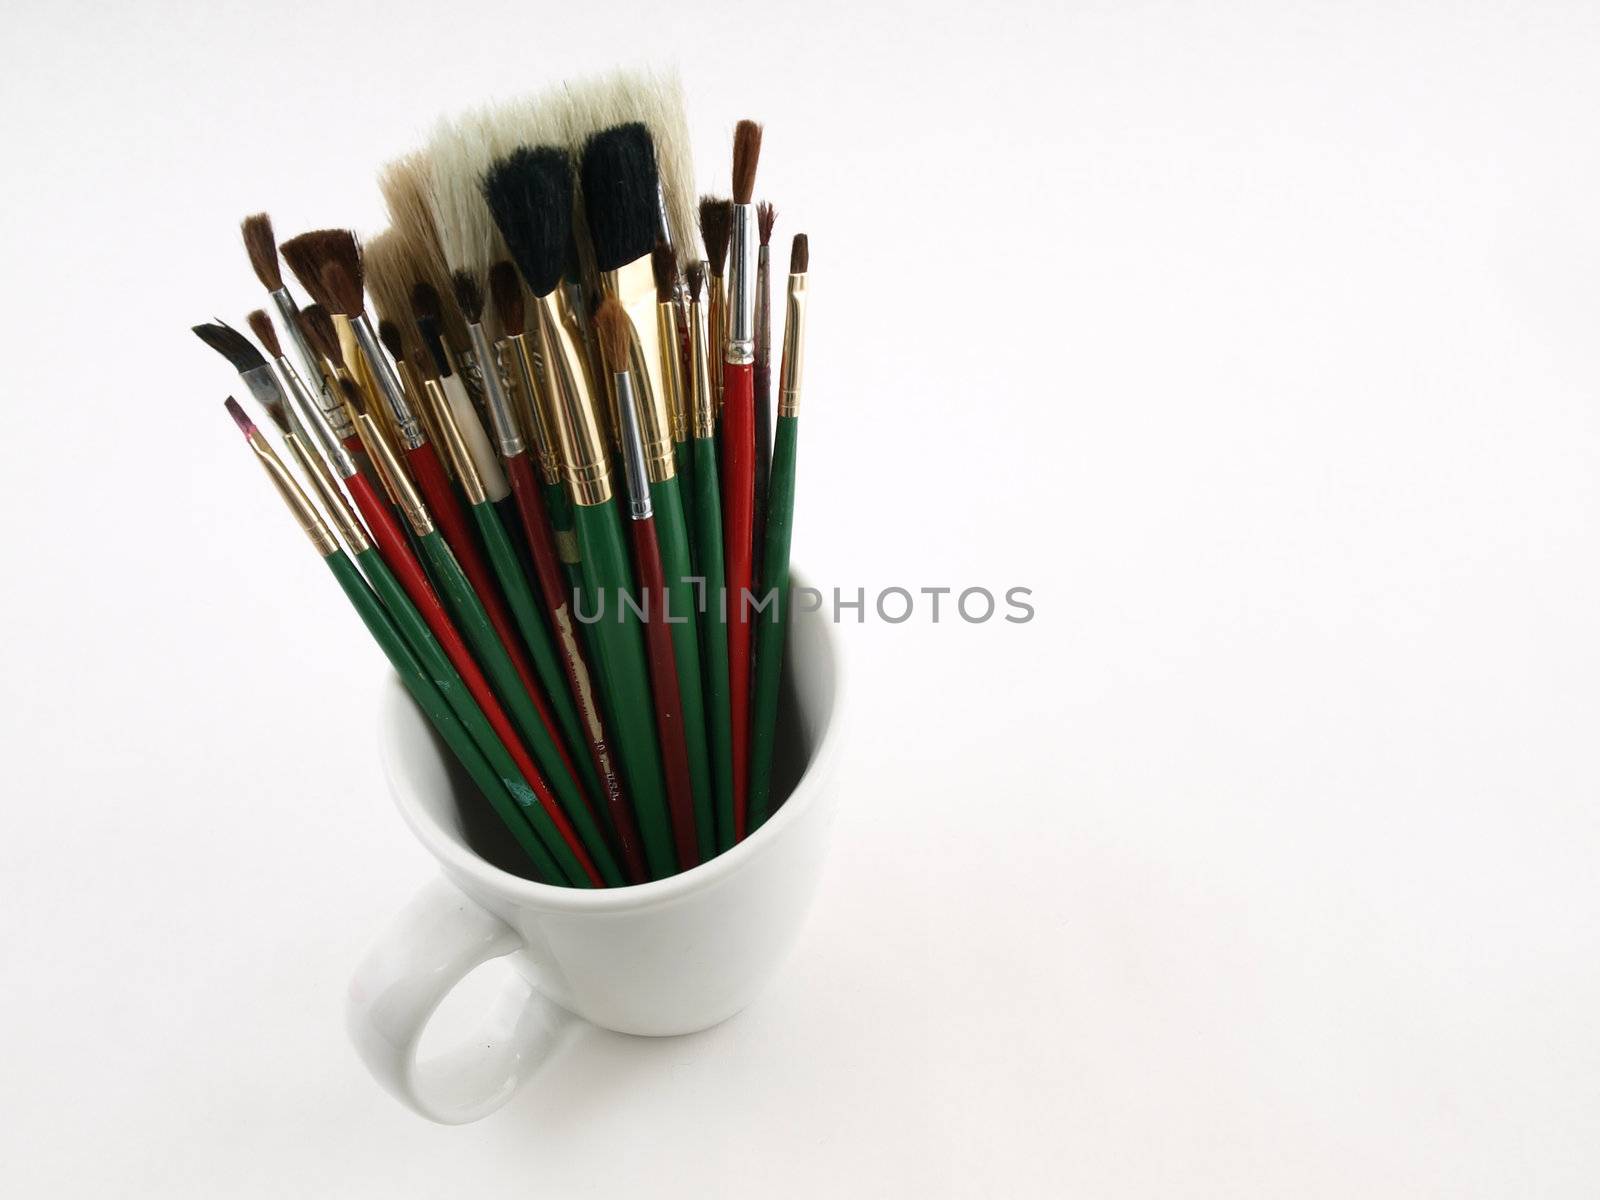 A white cup holds a group of artist brushes over a white background.